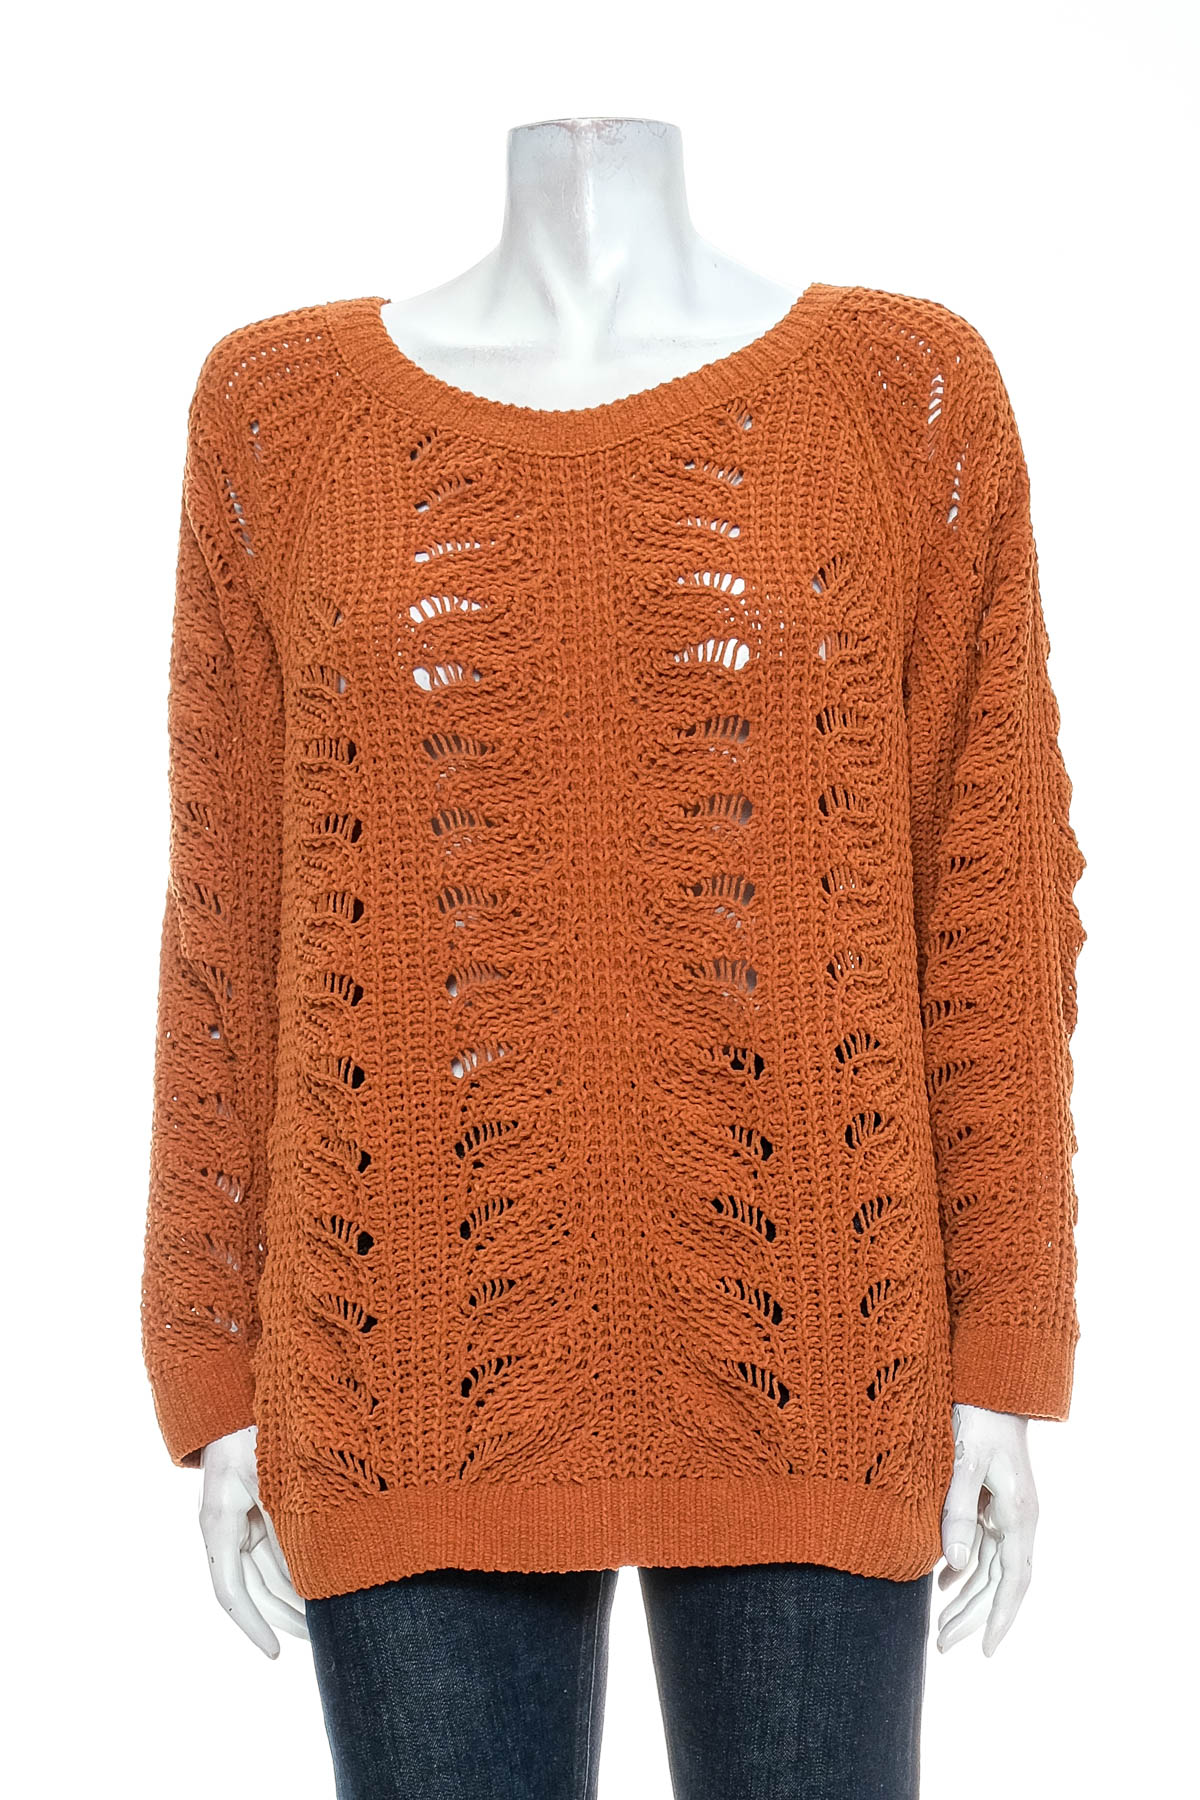 Women's sweater - ONLY CARMAKOMA - 0